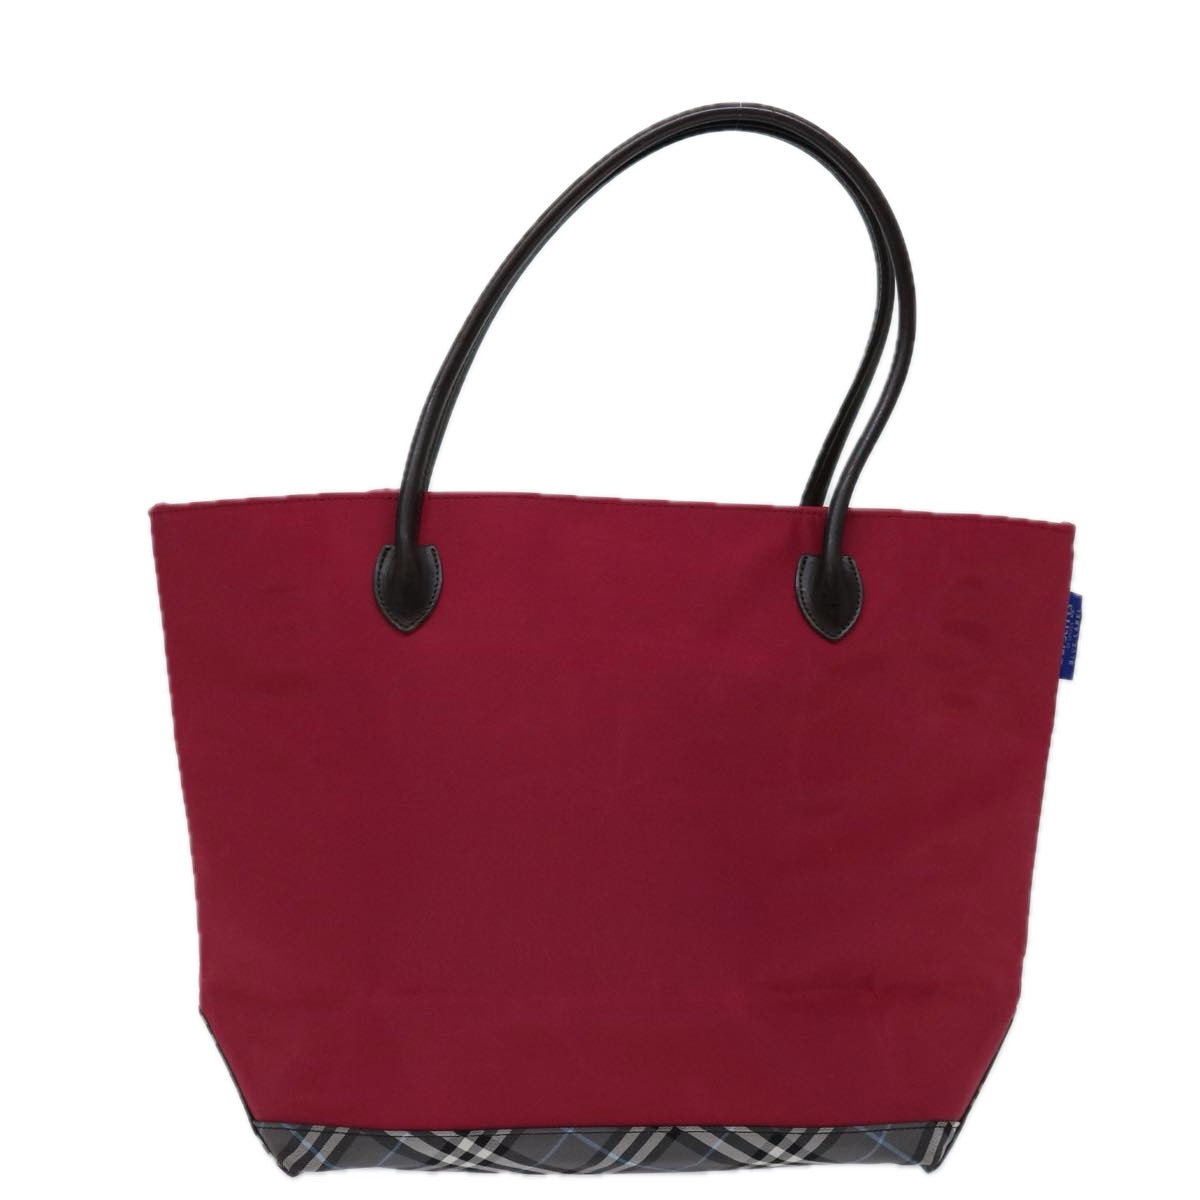 Burberrys Blue Label Tote Bag Nylon Red Auth 69693 - 0